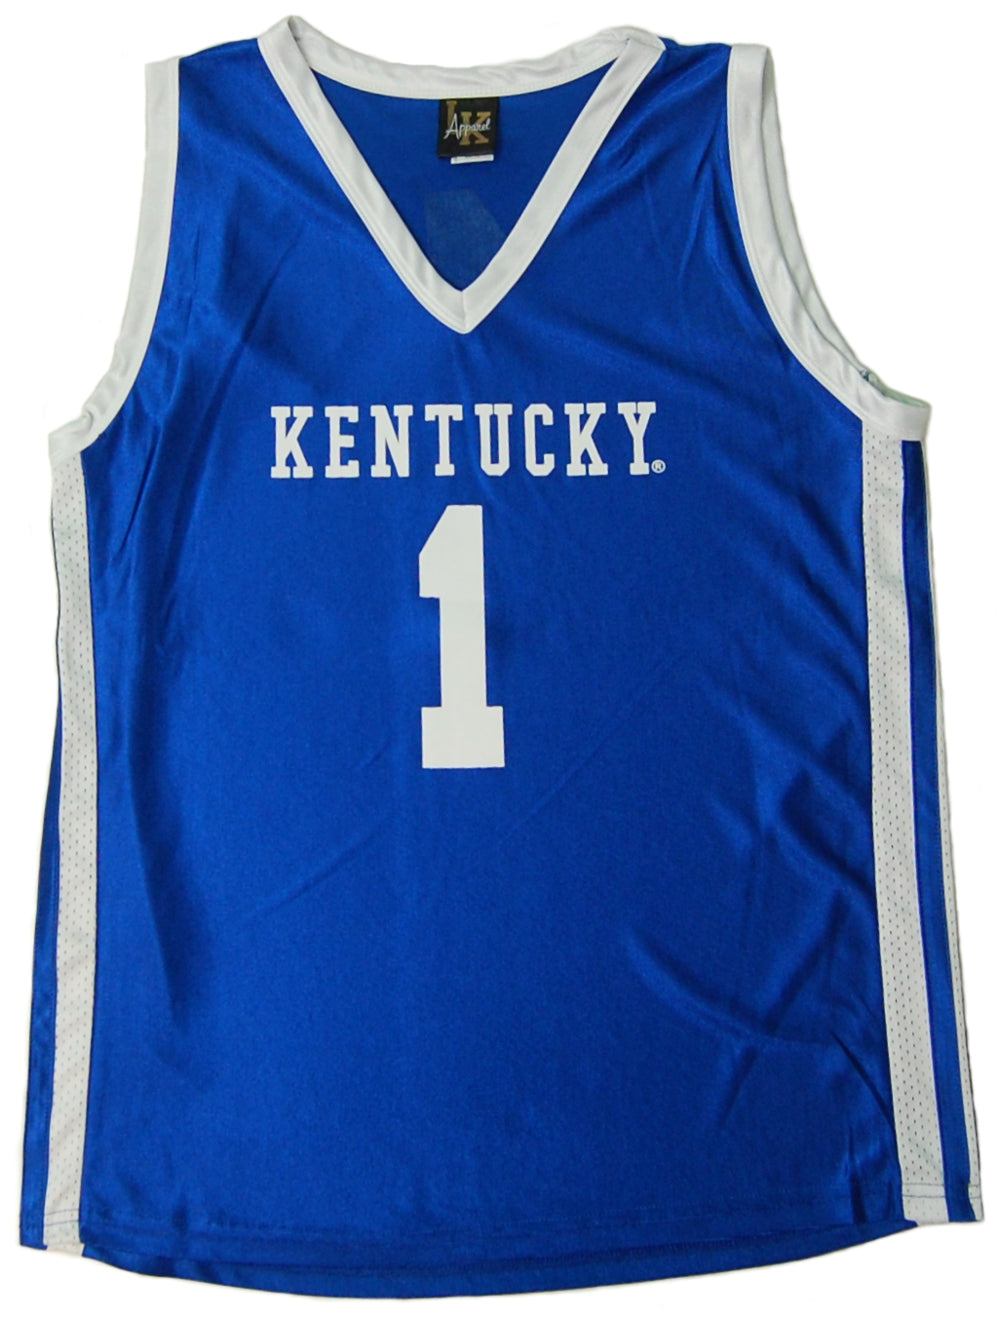 University Of Kentucky Basketball Jersey Shop Clothing Shoes Online